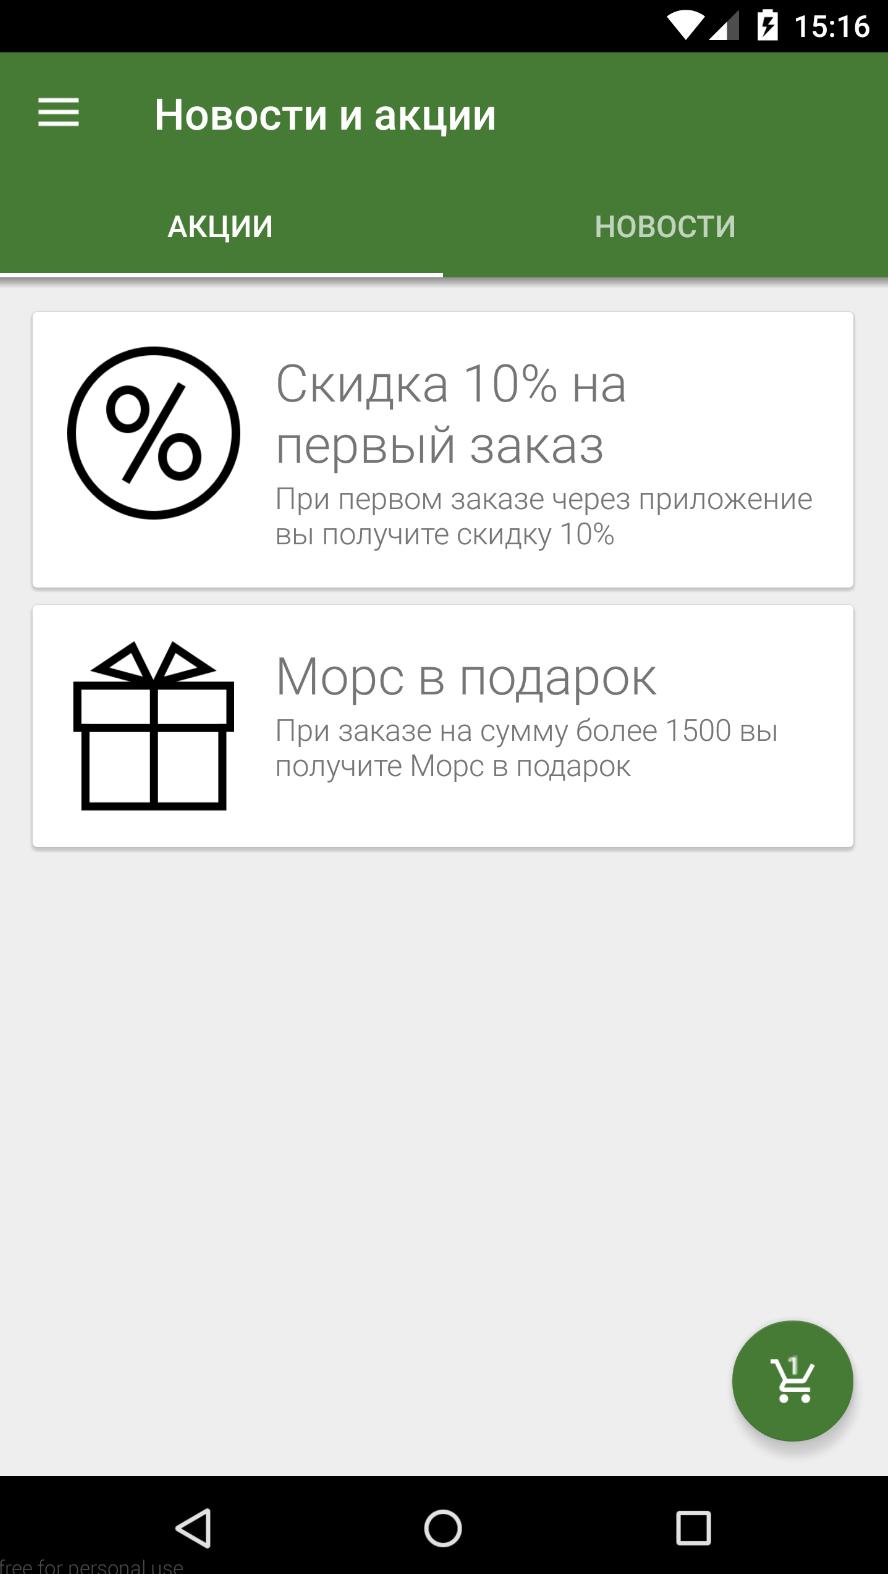 Кинза И Мята For Android - APK Download